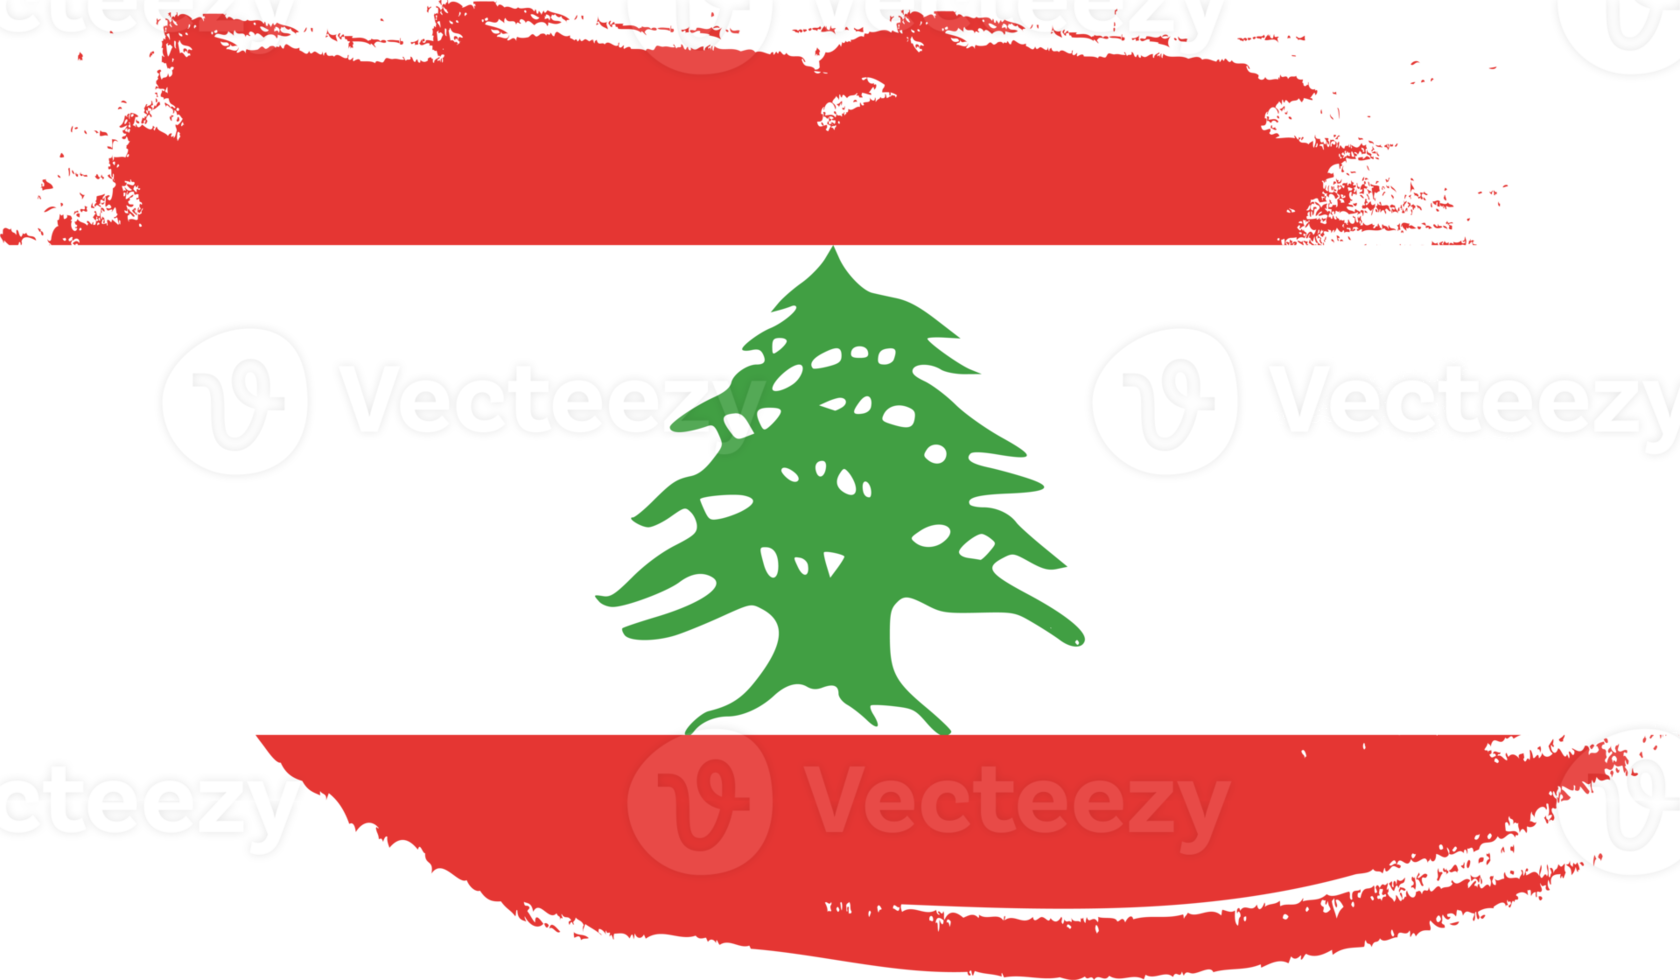 Lebanon flag with grunge texture png